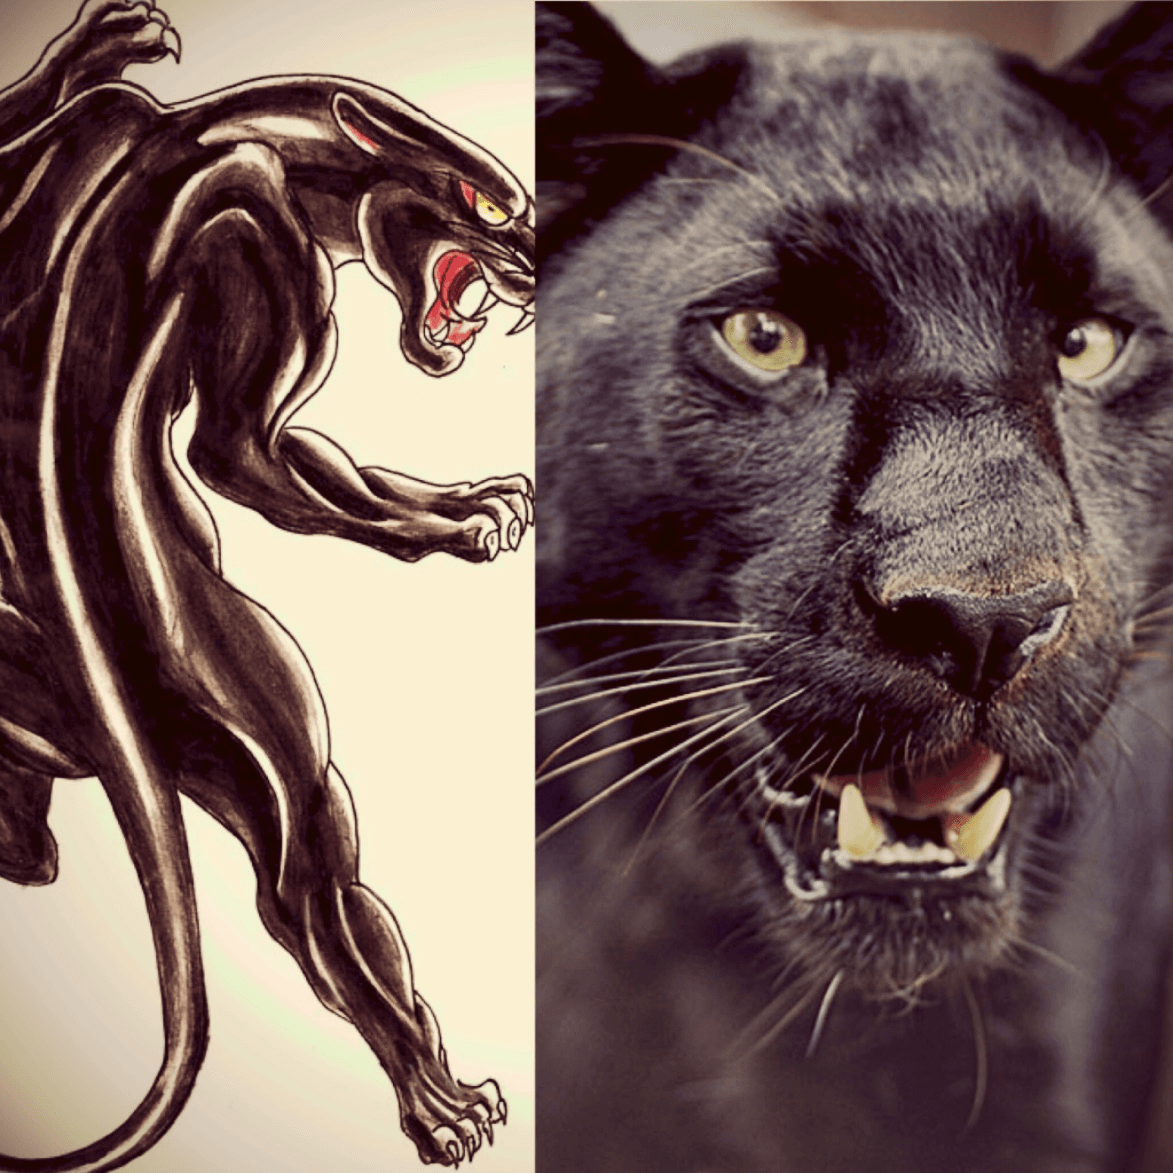 Realistic Panther Tattoo 1  Panther tattoo Black panther tattoo Jaguar  tattoo  Panther tattoo Black panther tattoo Jaguar tattoo